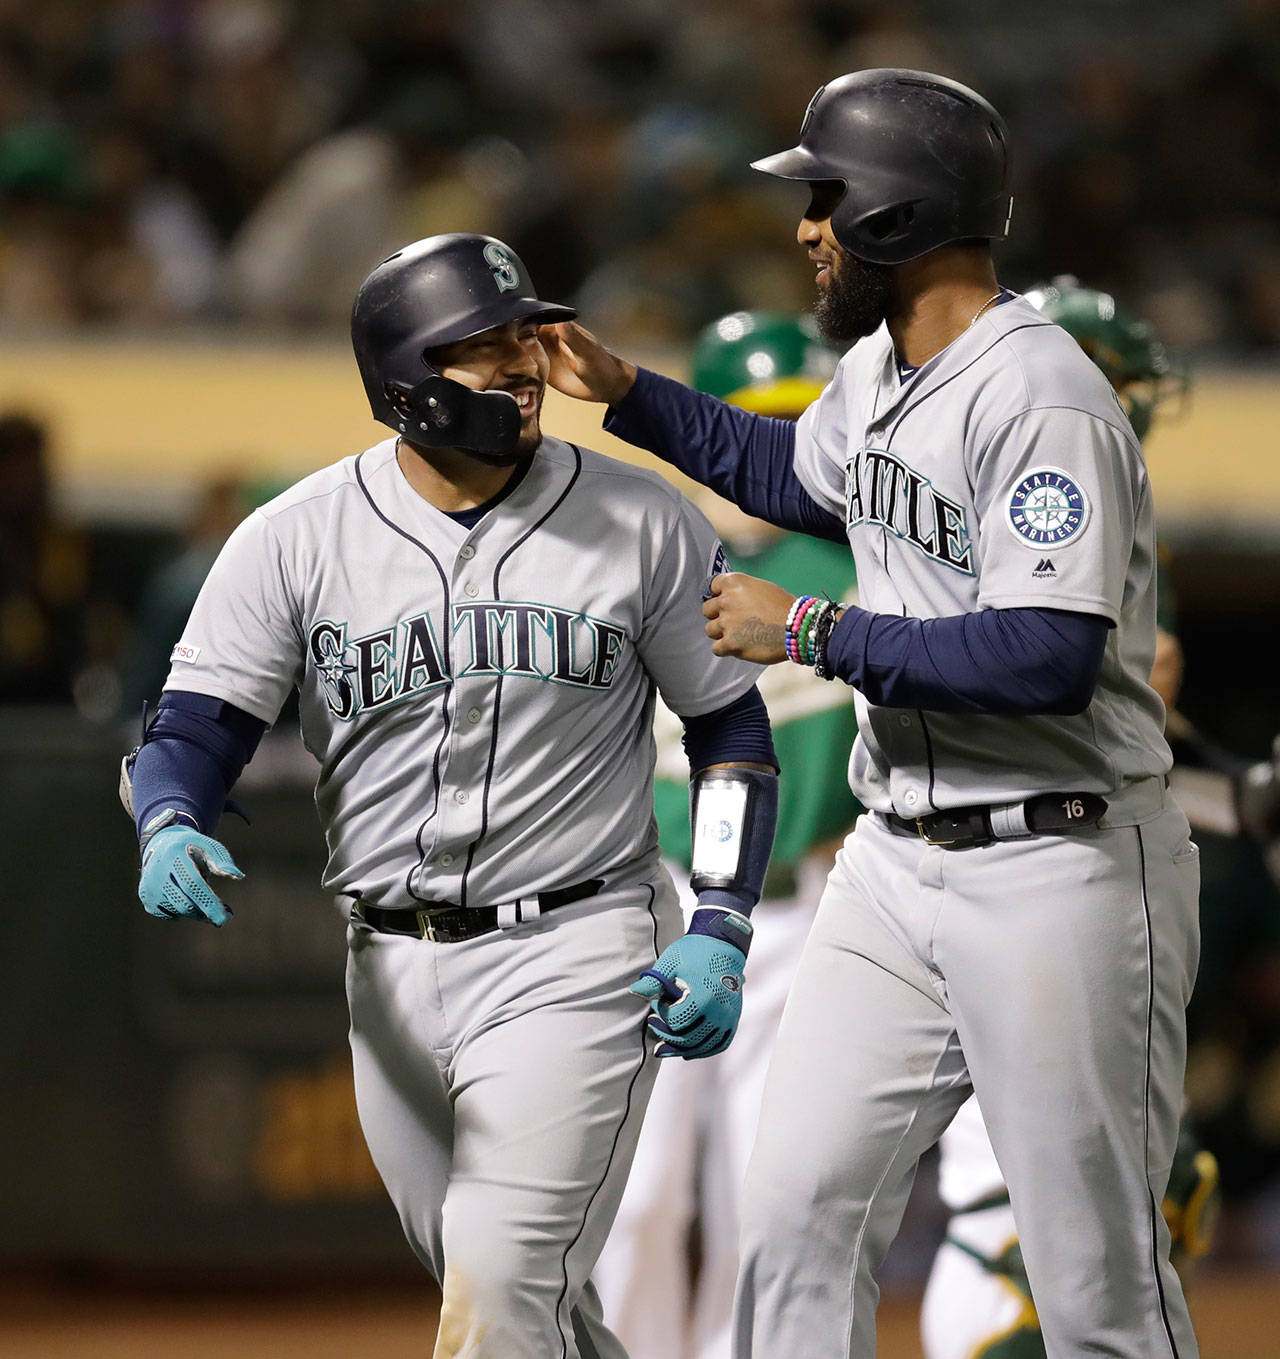 The Mariners’ Omar Narvaez (left) celebrates with Domingo Santana after hitting a two-run home run during the seventh inning of a game against the Athletics on June 14, 2019, in Oakland, Calif. (AP Photo/Ben Margot)